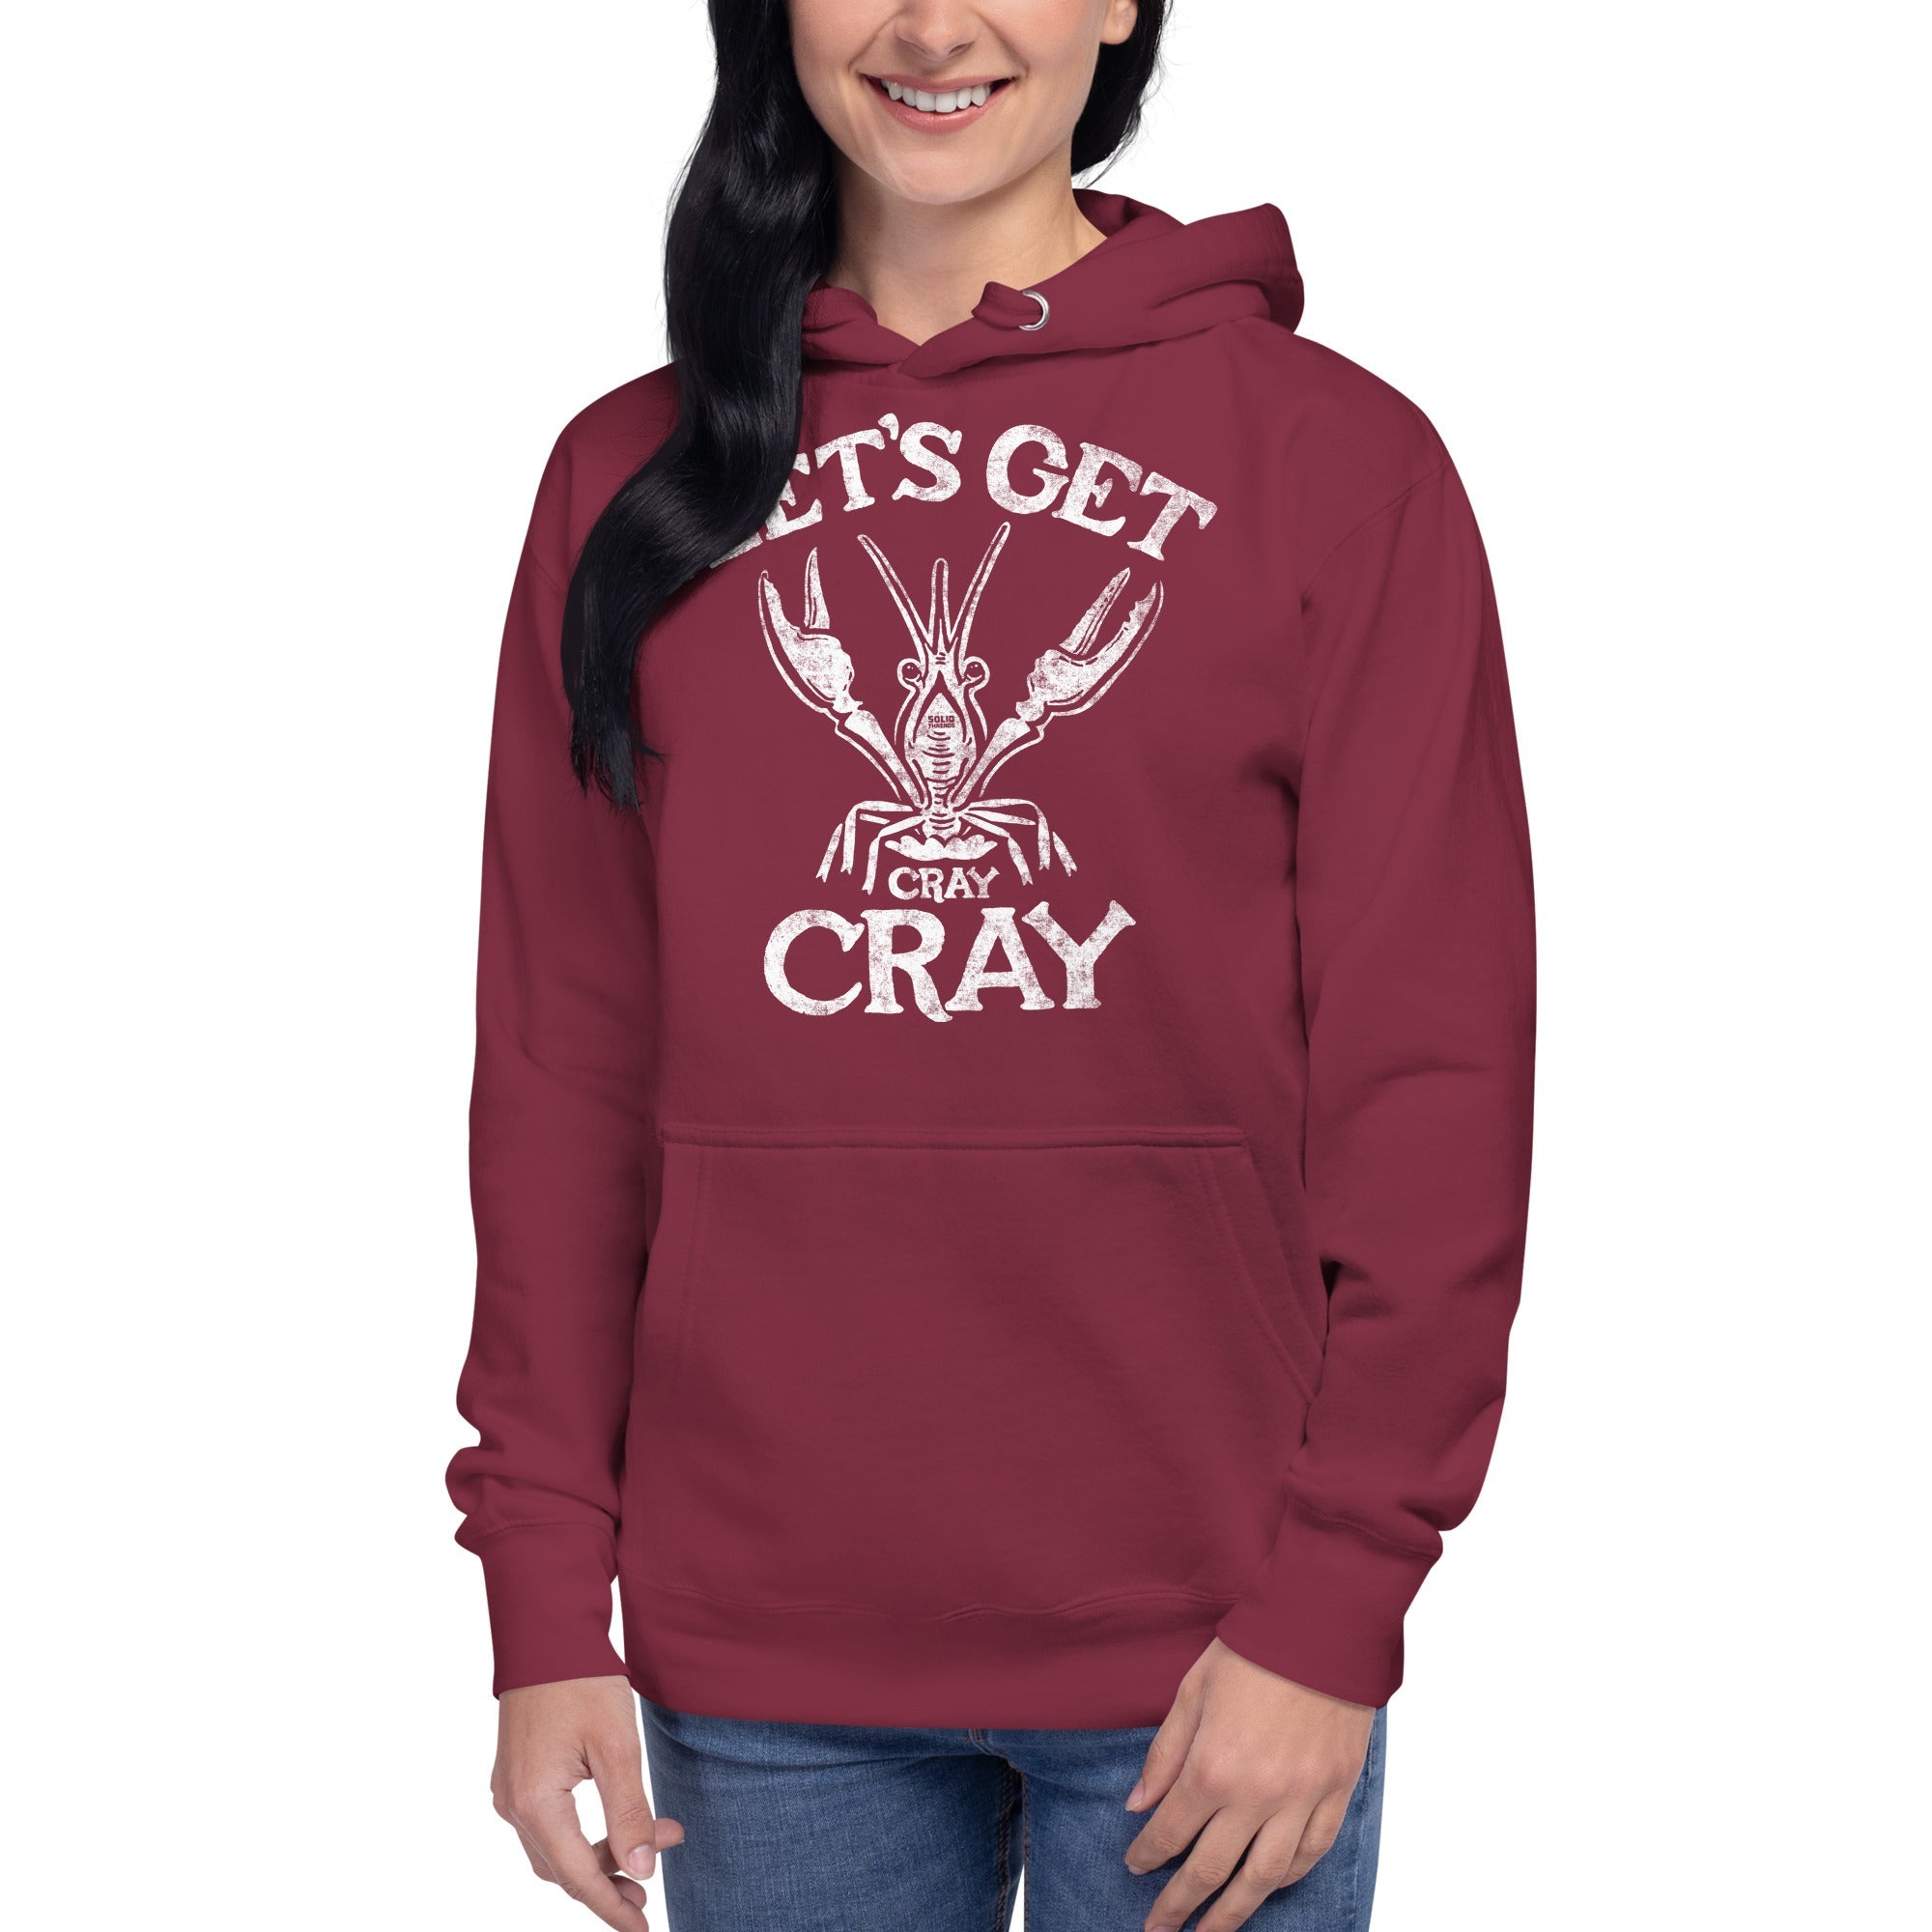 Let's Get Cray Cray Funny Classic Pullover Hoodie | Vintage Seafood Fleece On Model | Solid Threads